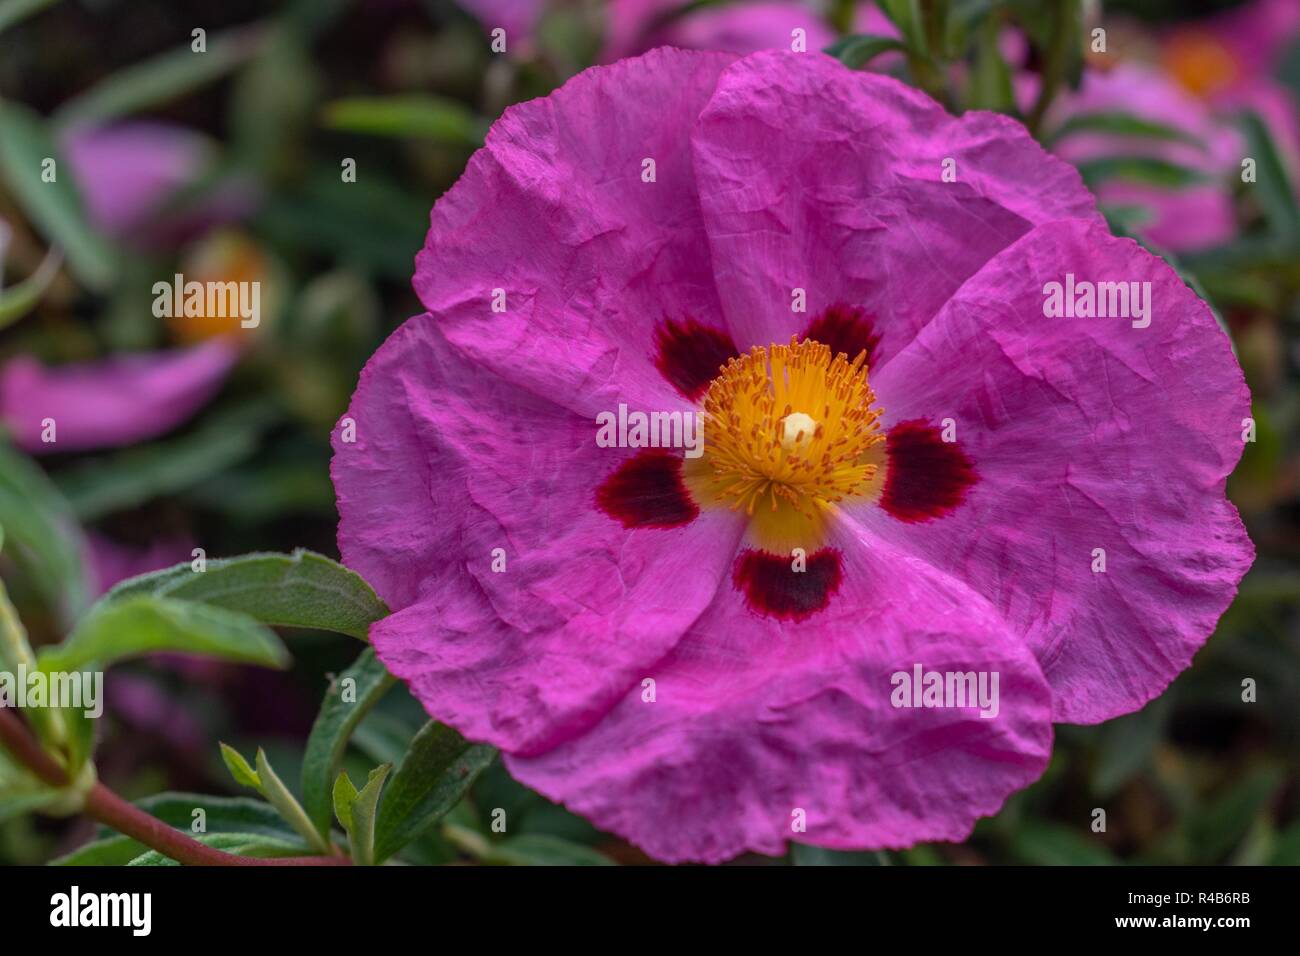 Close up image of a pink petal flower with dark brown spots at the base and orange stamen in the middle Stock Photo